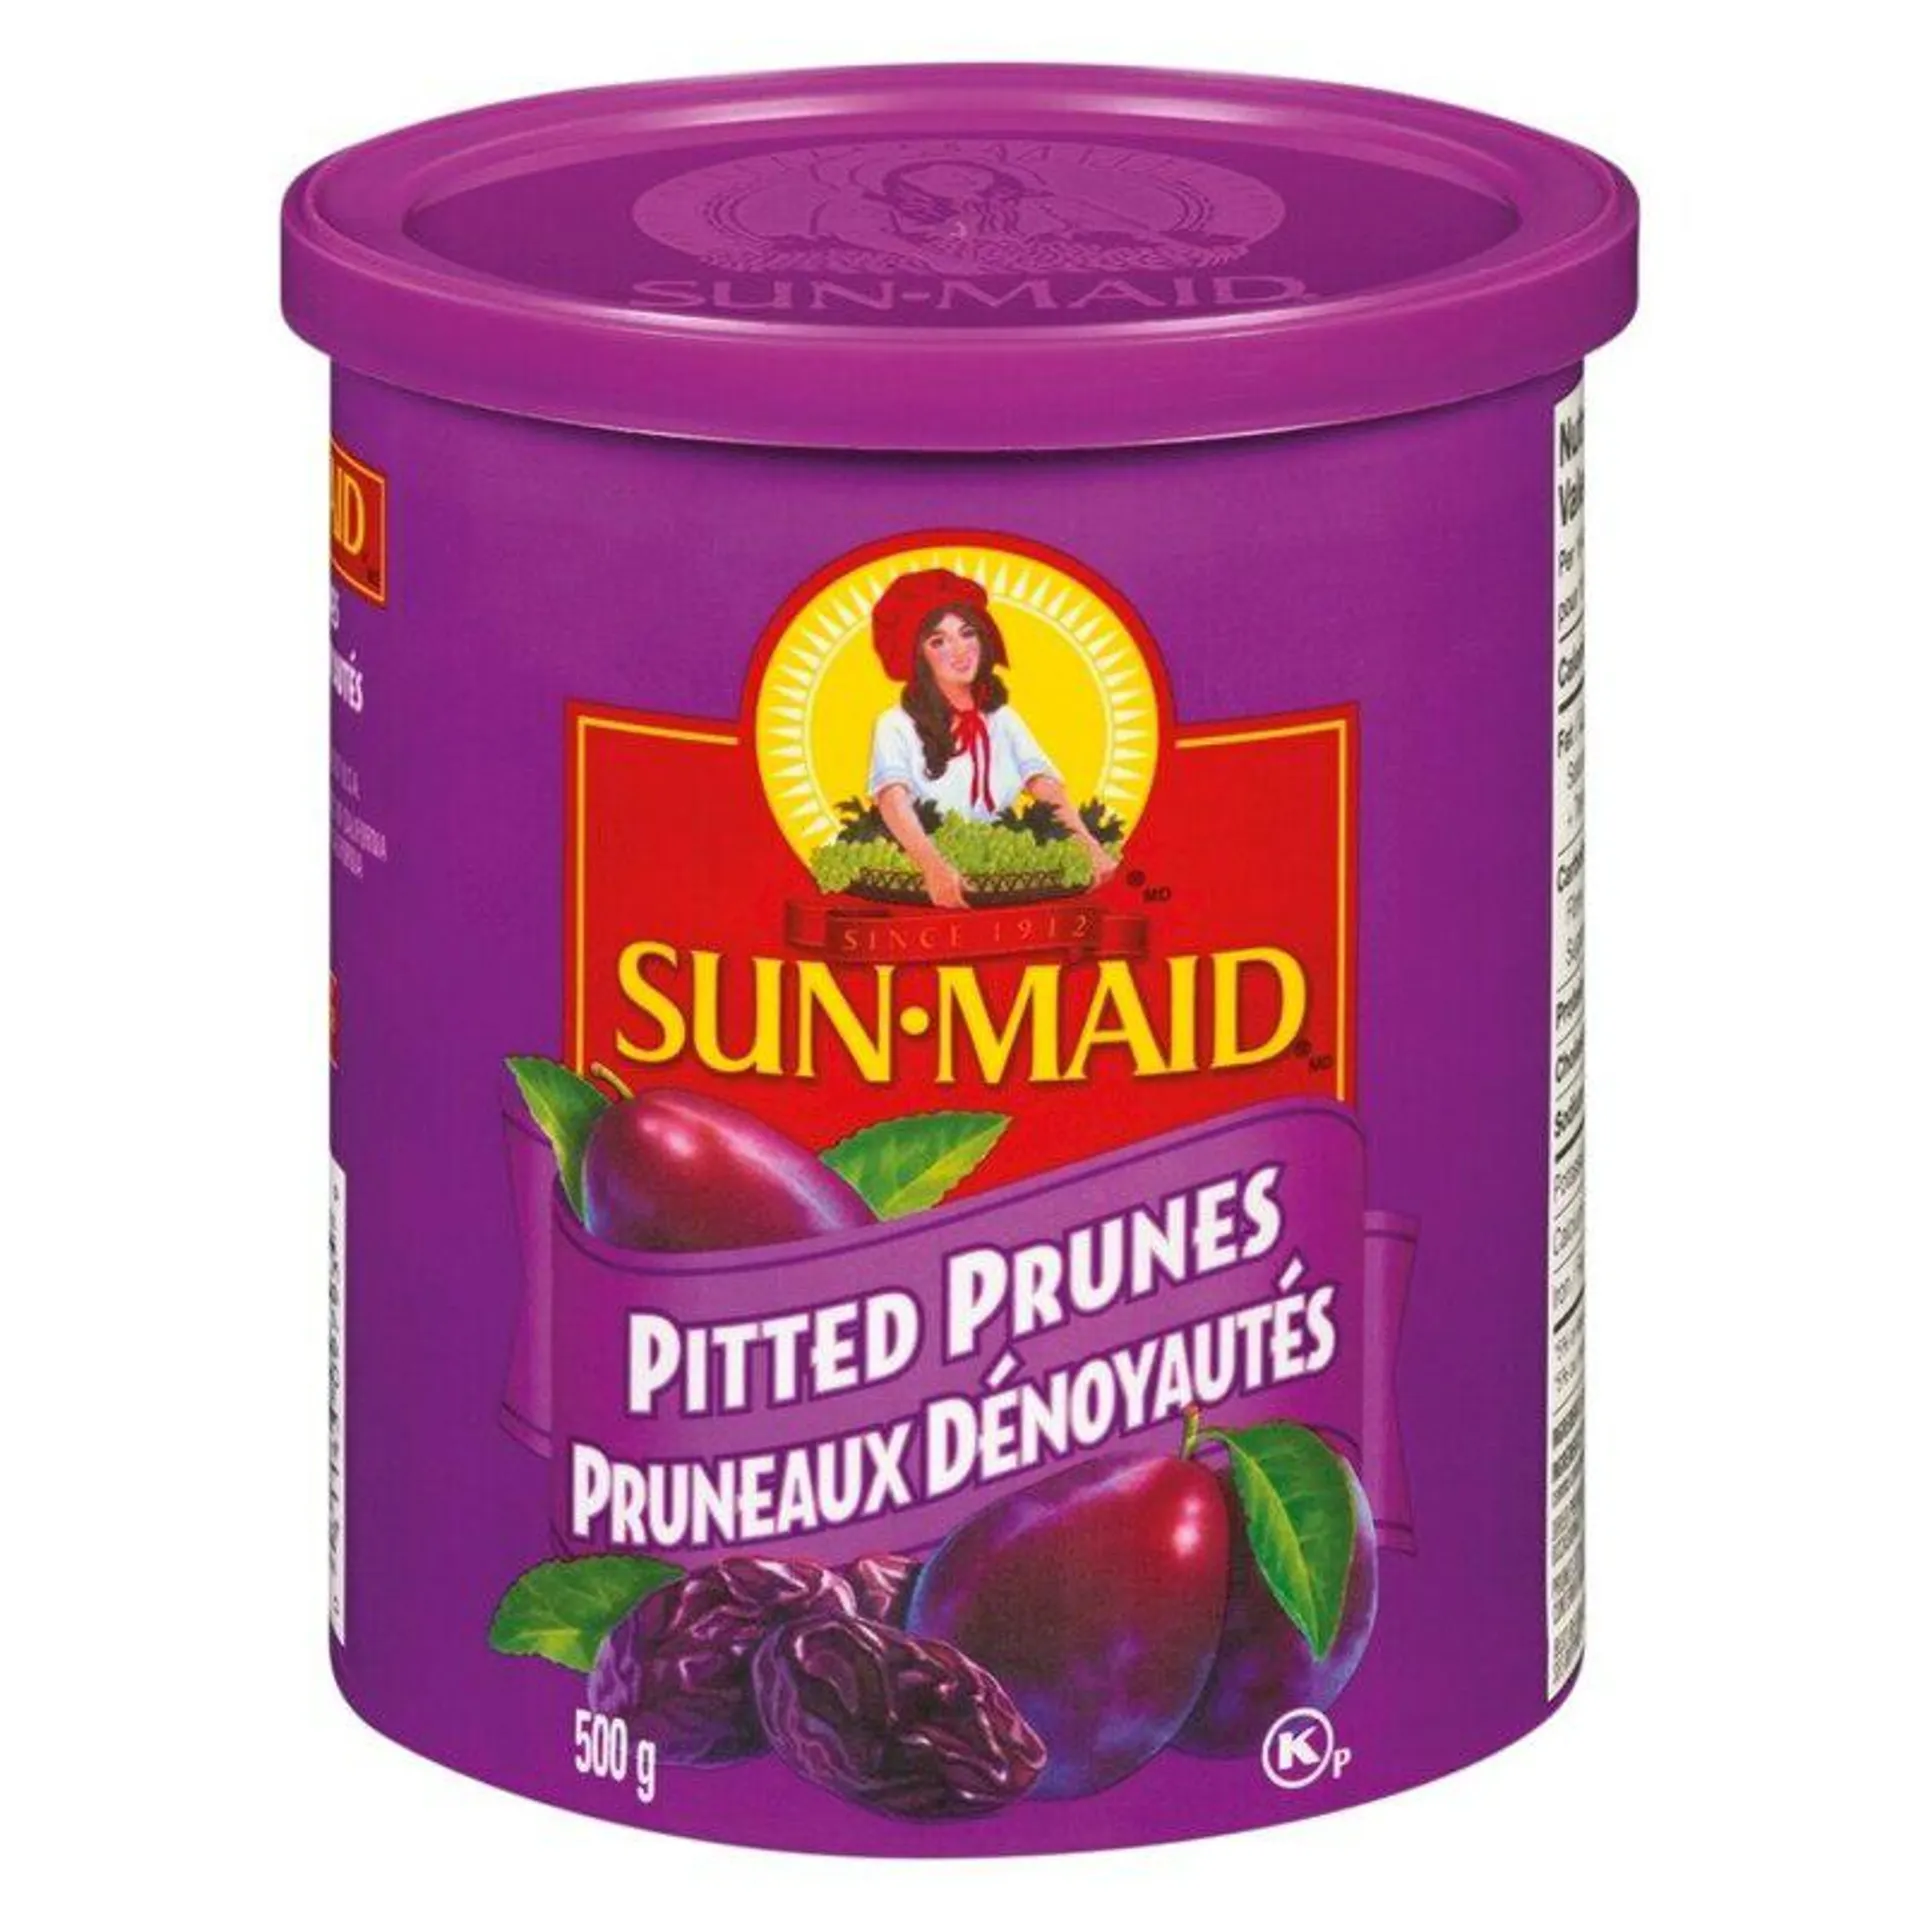 SunMaid Pitted Prunes 500gm